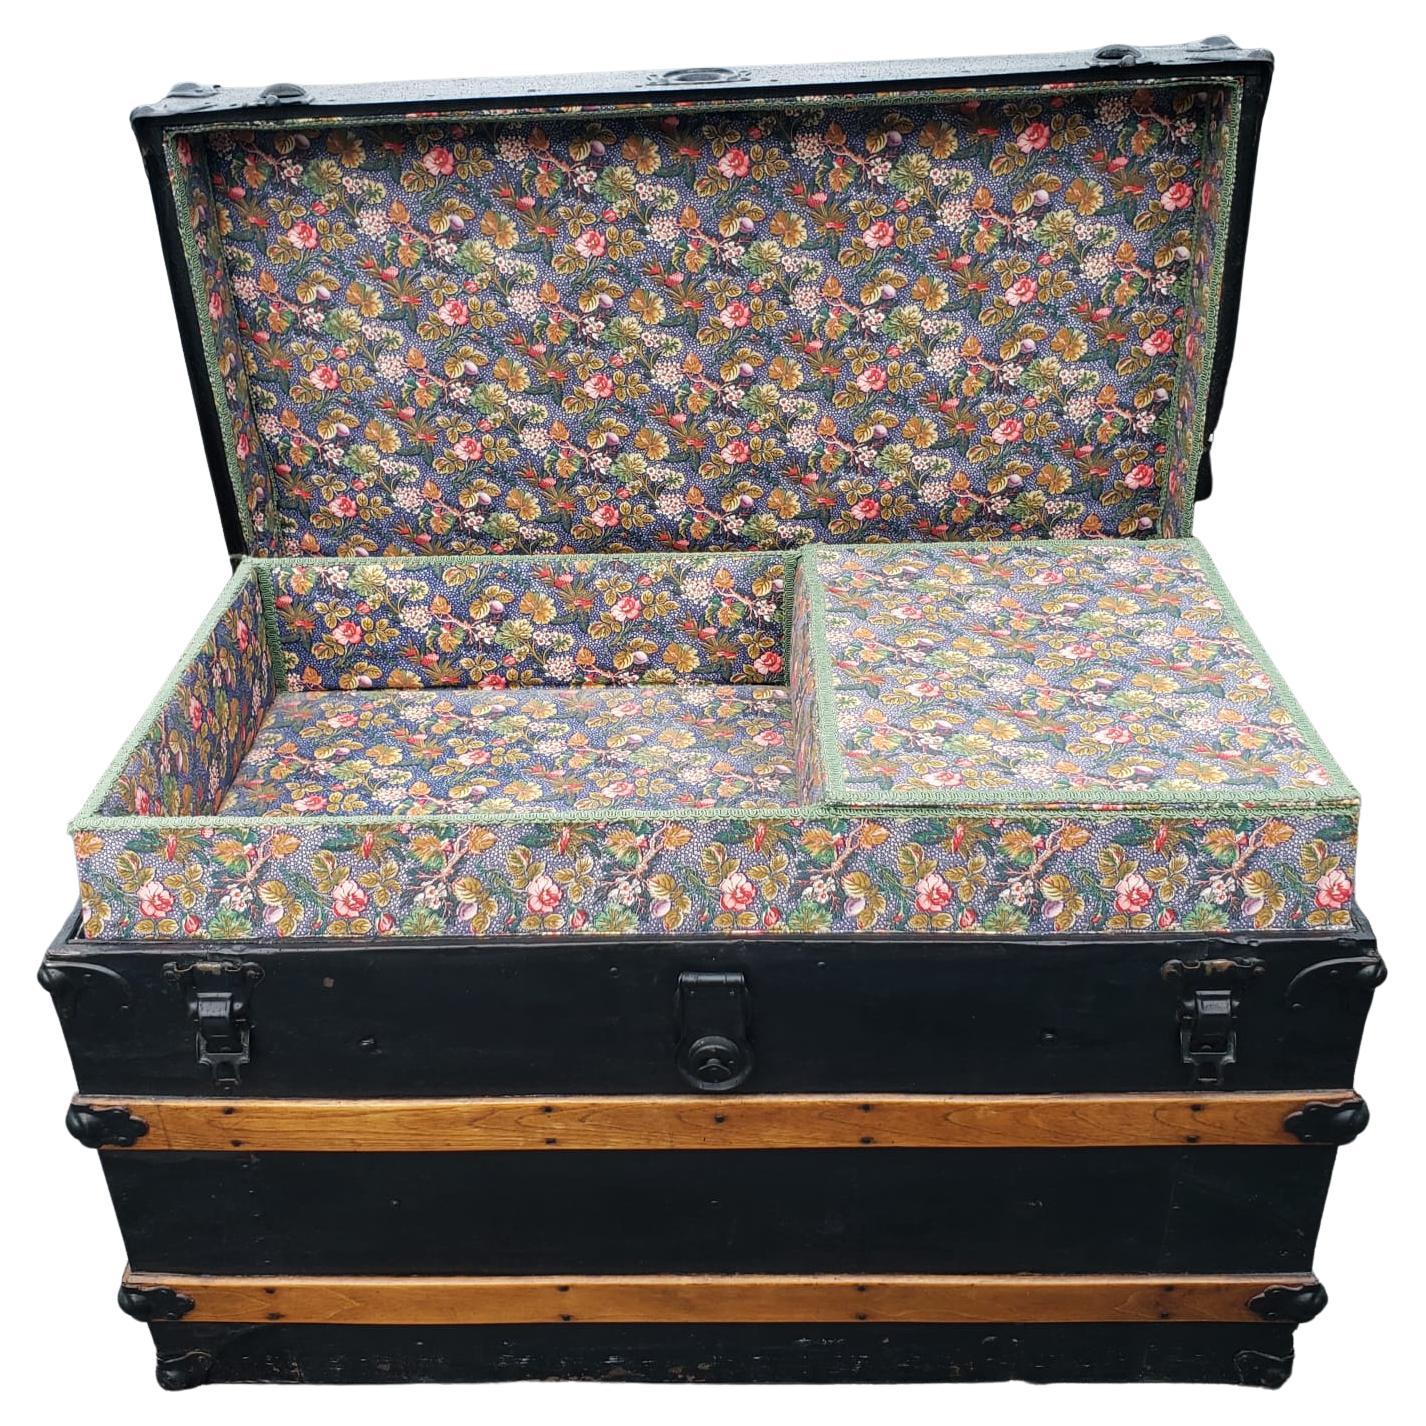 Woodwork Antique American Refinished and Re-Upholstered Blanket Trunk Chest